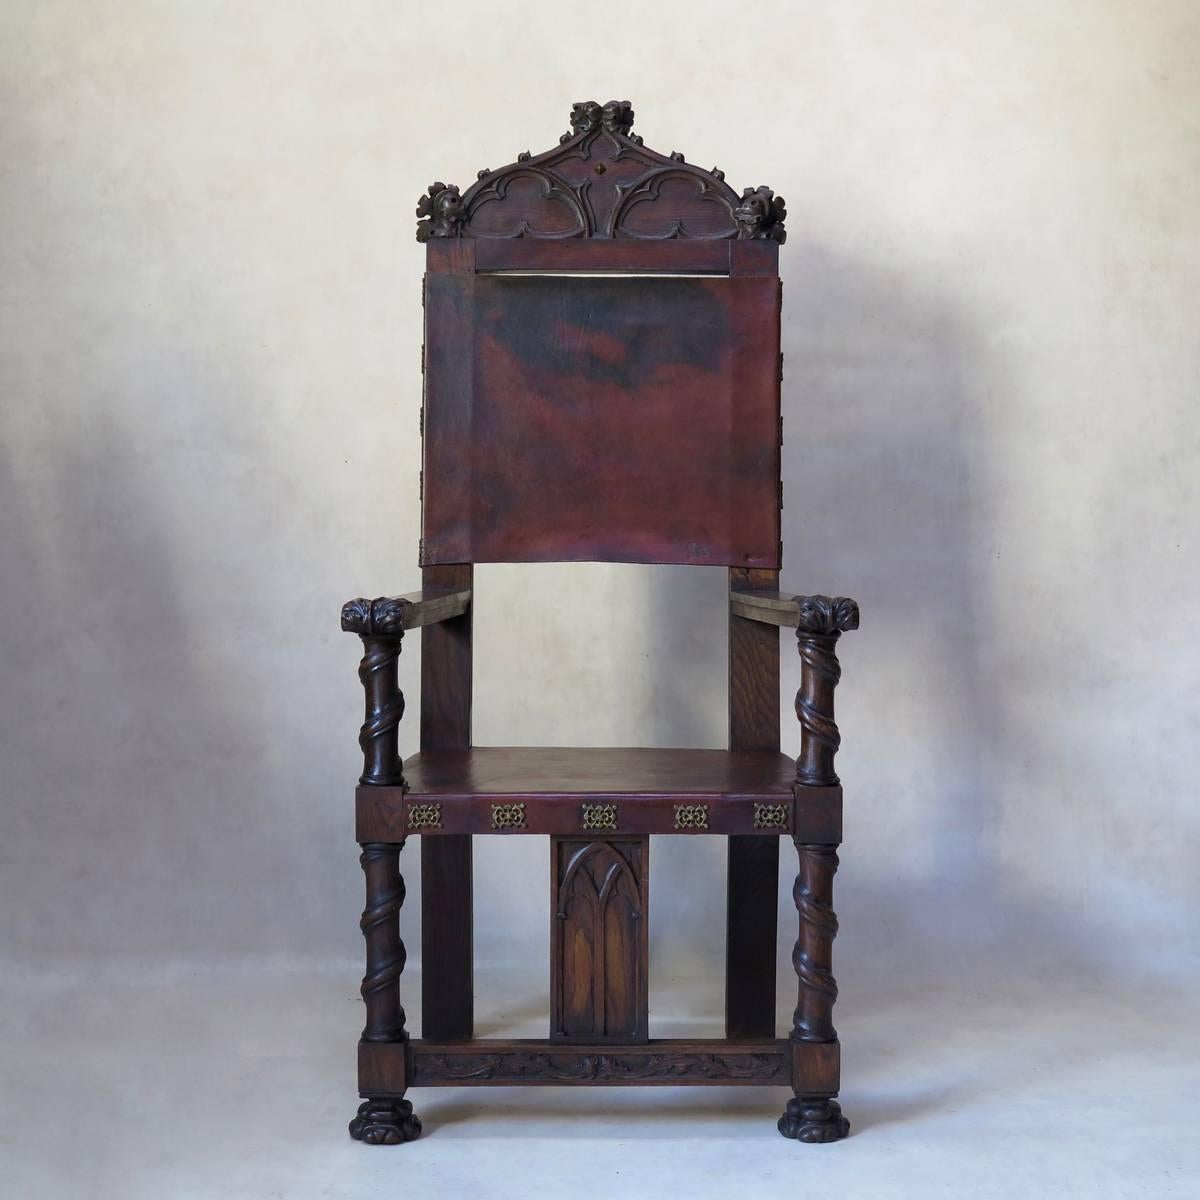 Imposing pair of medieval / Gothic style armchairs, in carved oak, with leather seats and backs. Ornate brass trim.